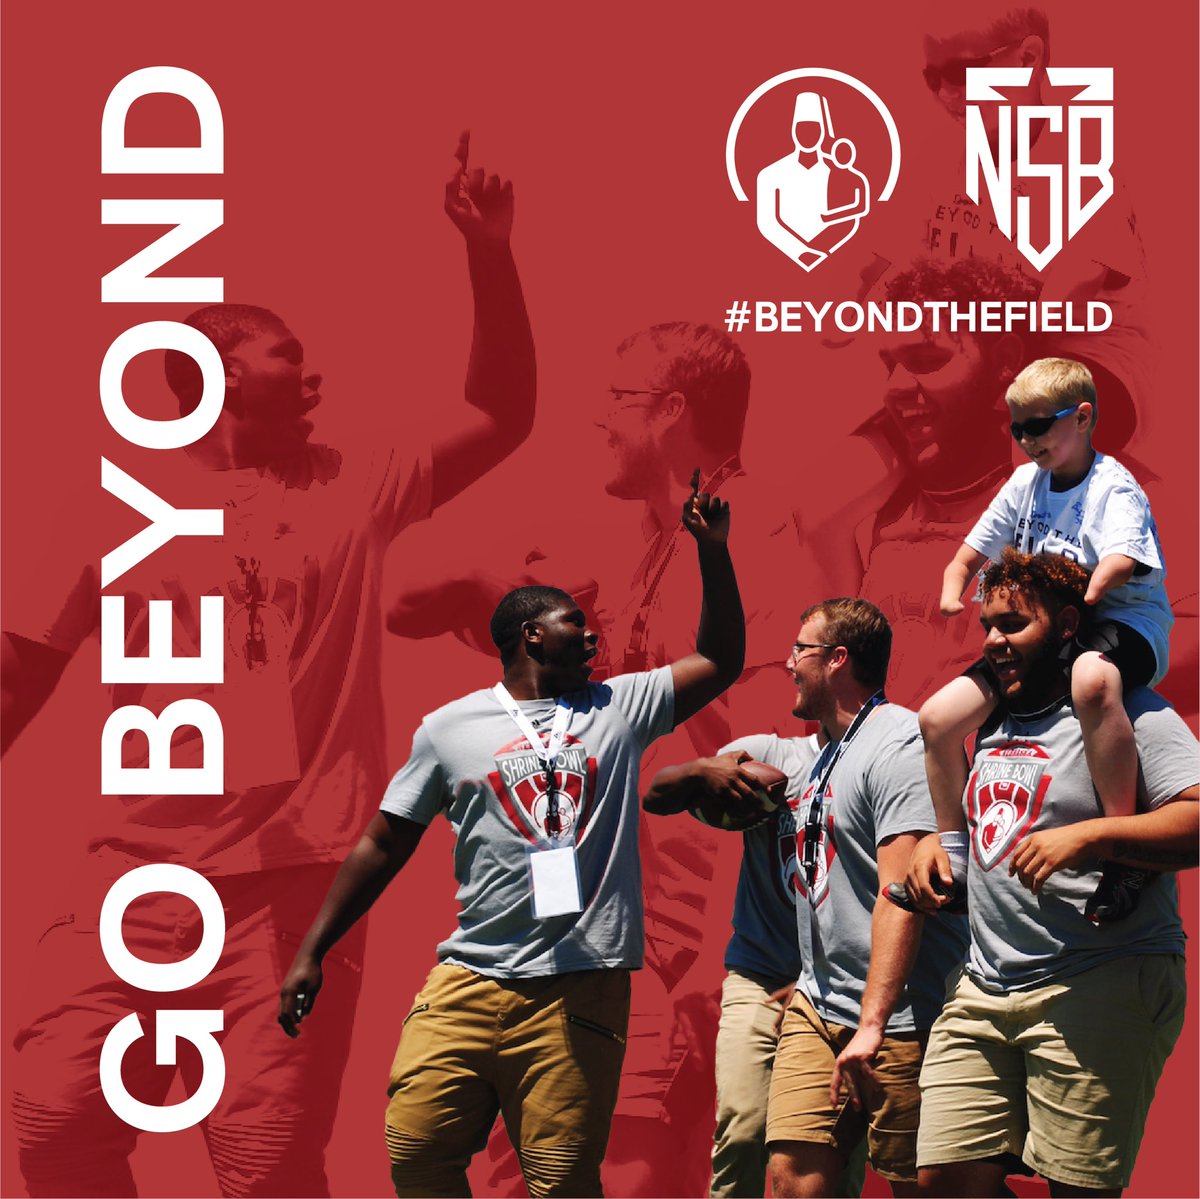 The players are going #BeyondTheField today, learning about the incredible work of Shriners Children’s and Shriners. You can join them in becoming a part of #MoreThanAGame and #GoBeyond.

shopeasycart.com/store.php?stor…